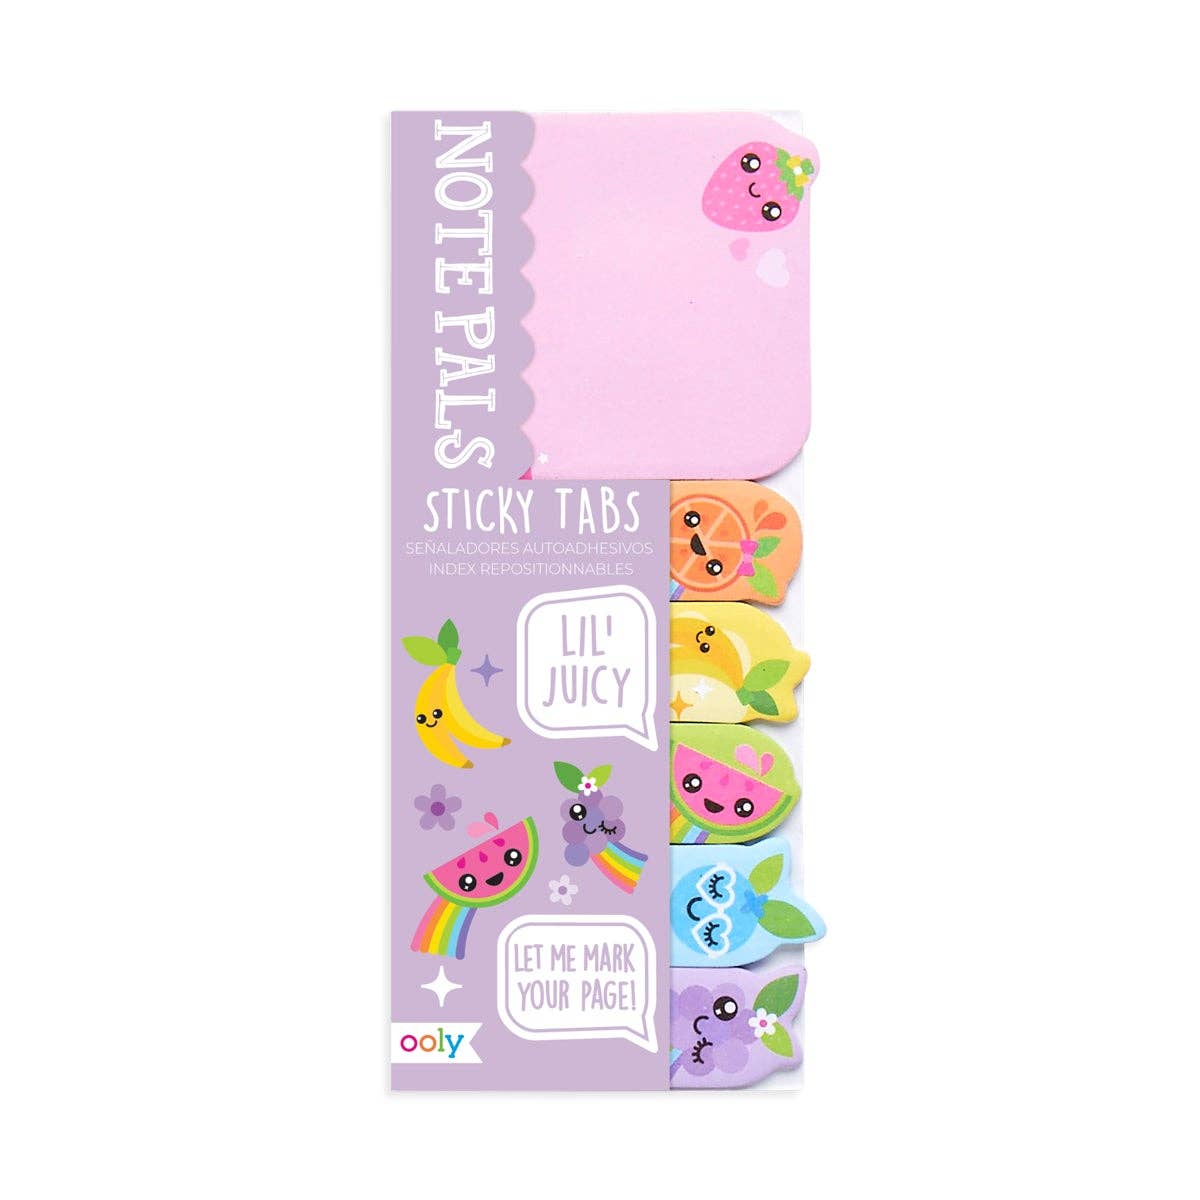 Note Pals Sticky Tabs - Lil' Juicy (1 Pack)